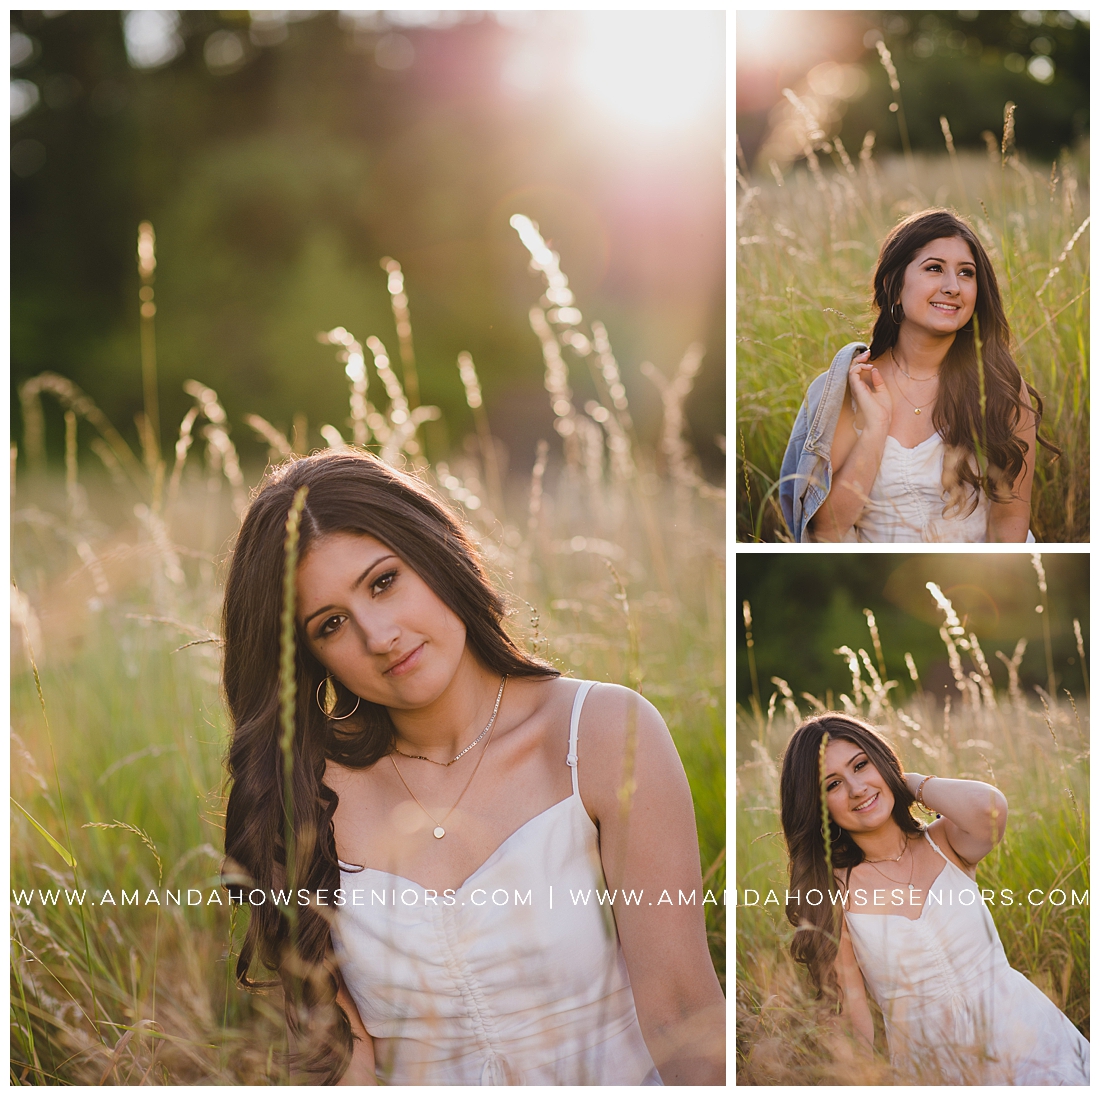 Golden Wheat Field Senior Portraits at Golden Hour with Cute Outfit Inspiration Photographed by Tacoma Senior Photographer Amanda Howse